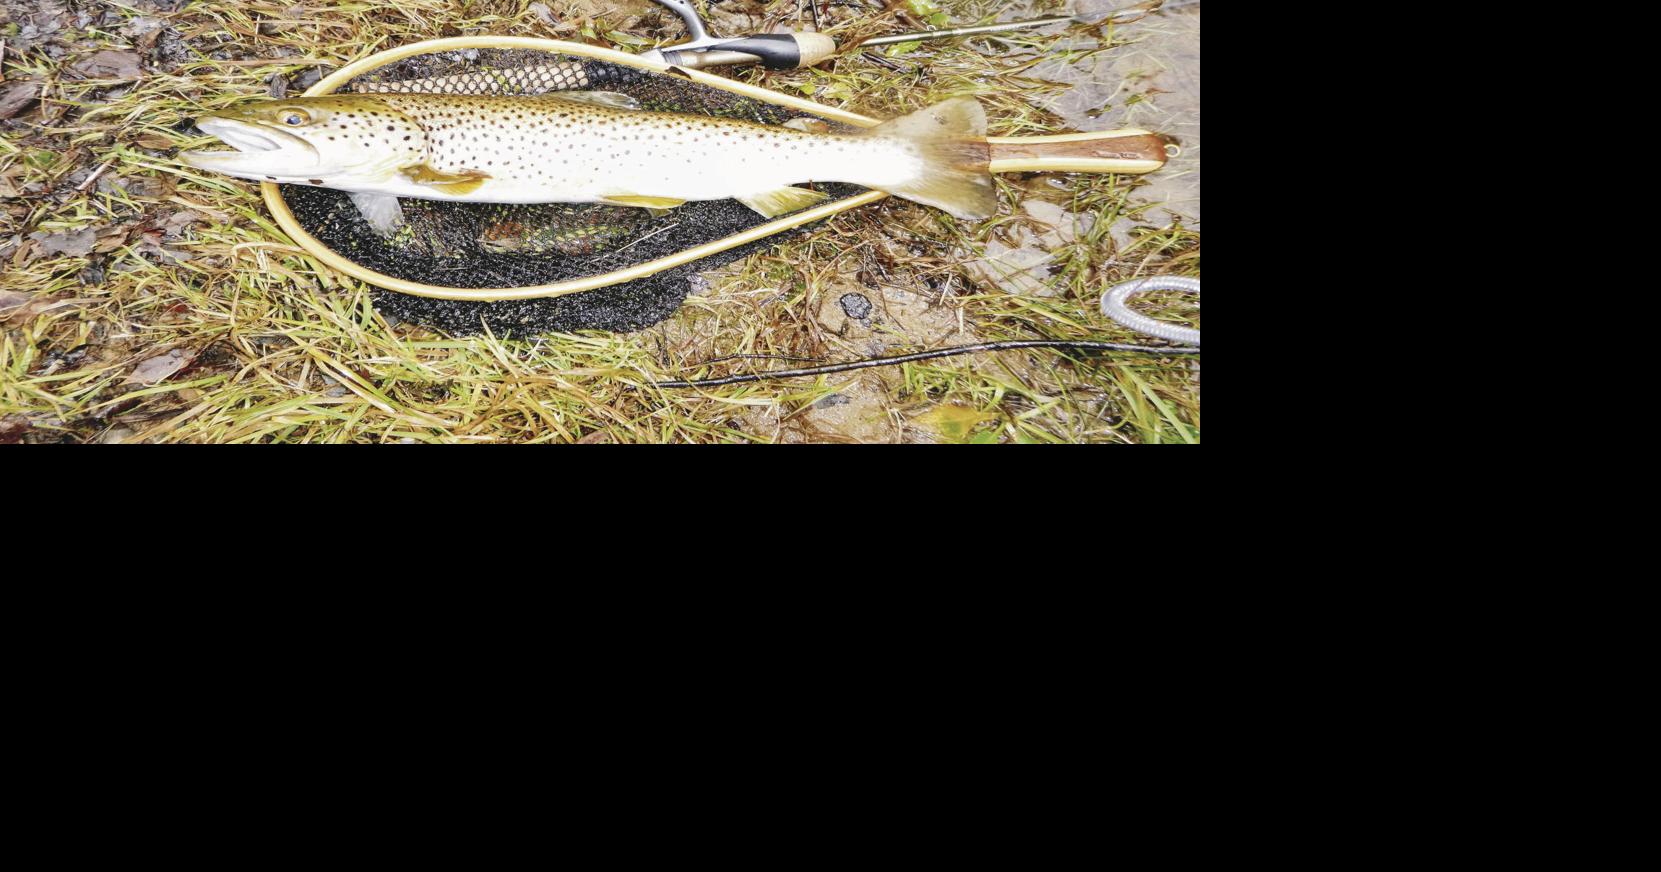 Can any of you veteran trout anglers give some insight on the most